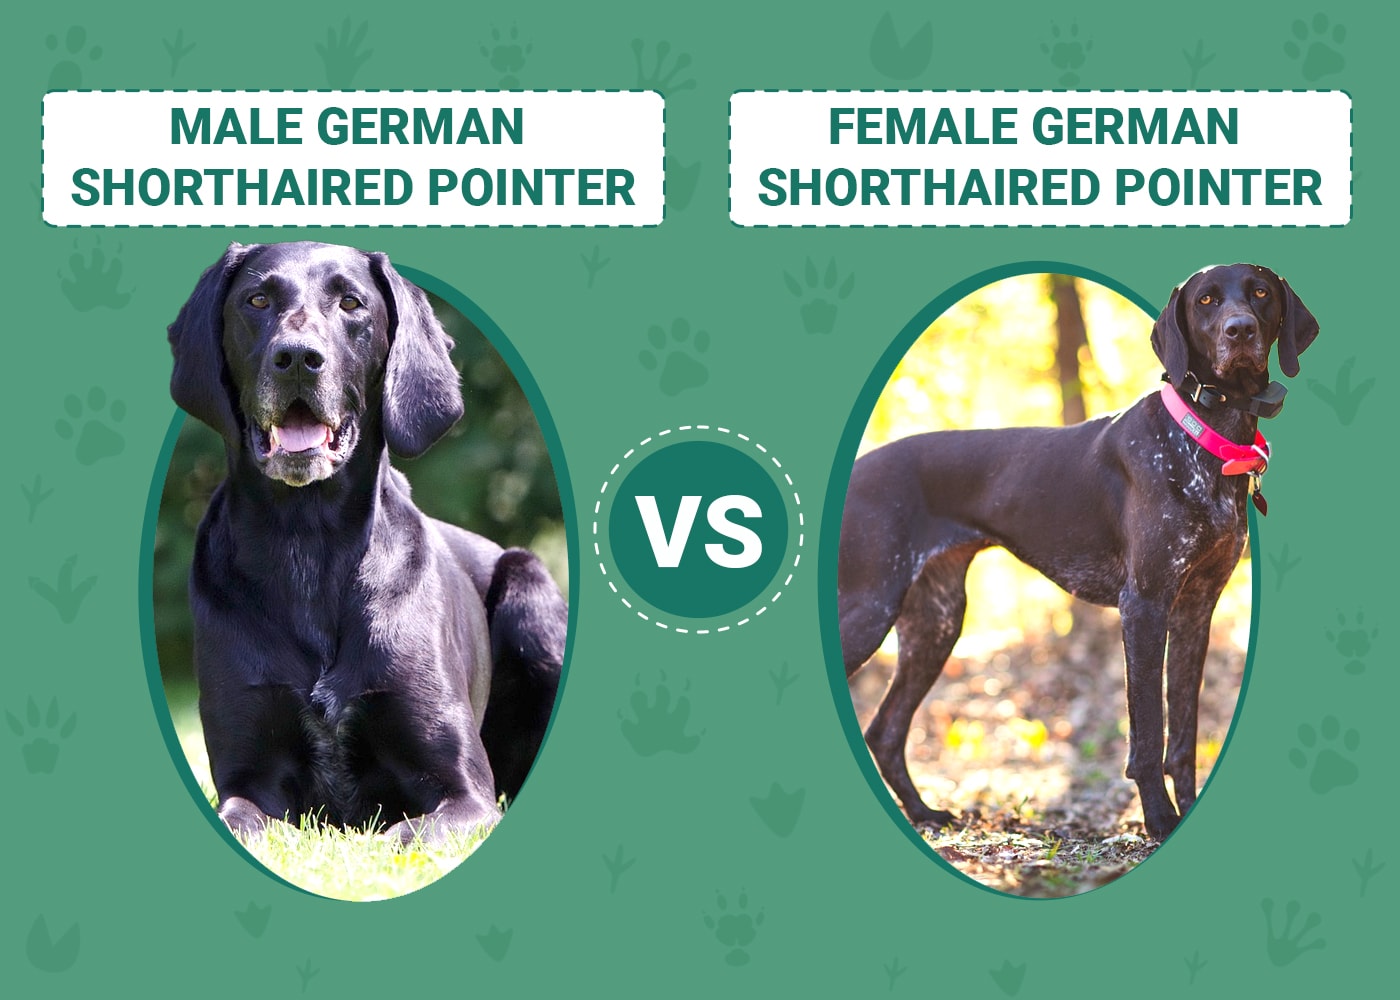 Male vs Female German Shorthaired Pointers